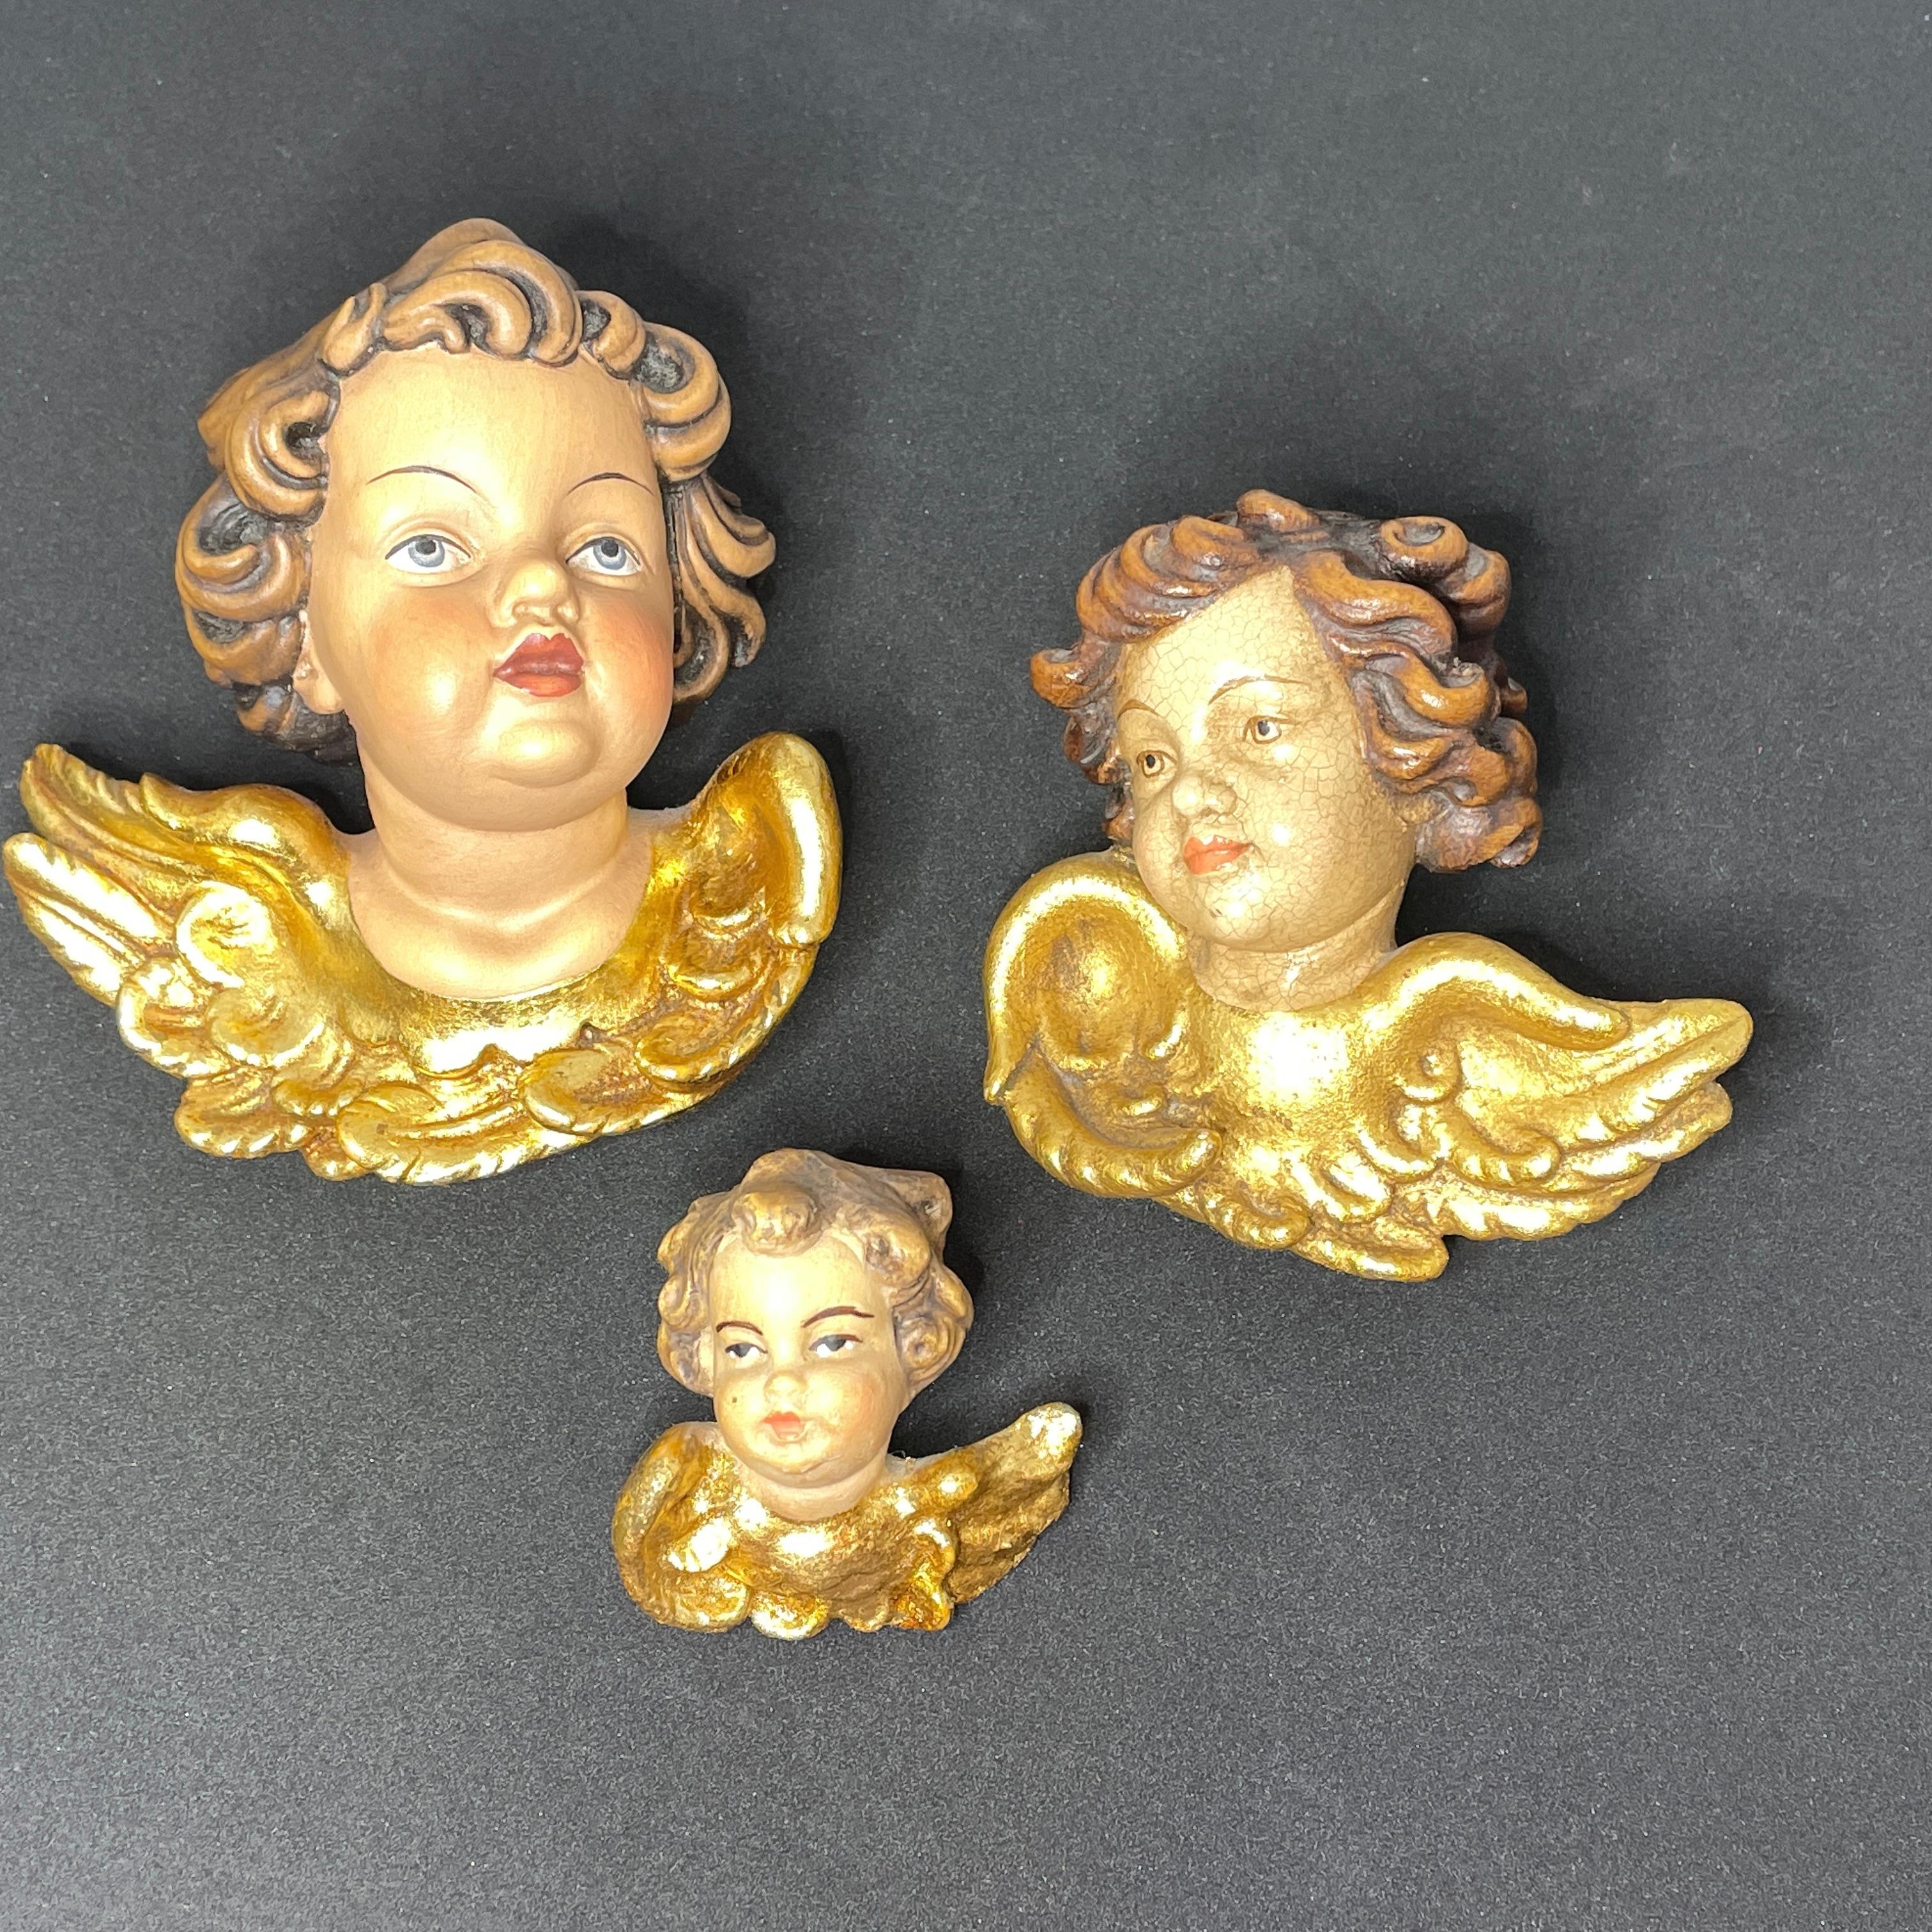 A set of three beautiful small miniature hand carved cherub angel Heads, found at an estate sale in Germany. Made by a woodcarver in the Oberstdorf in Germany, this area is well-known for their wood carvings. The size given in the dimensions section